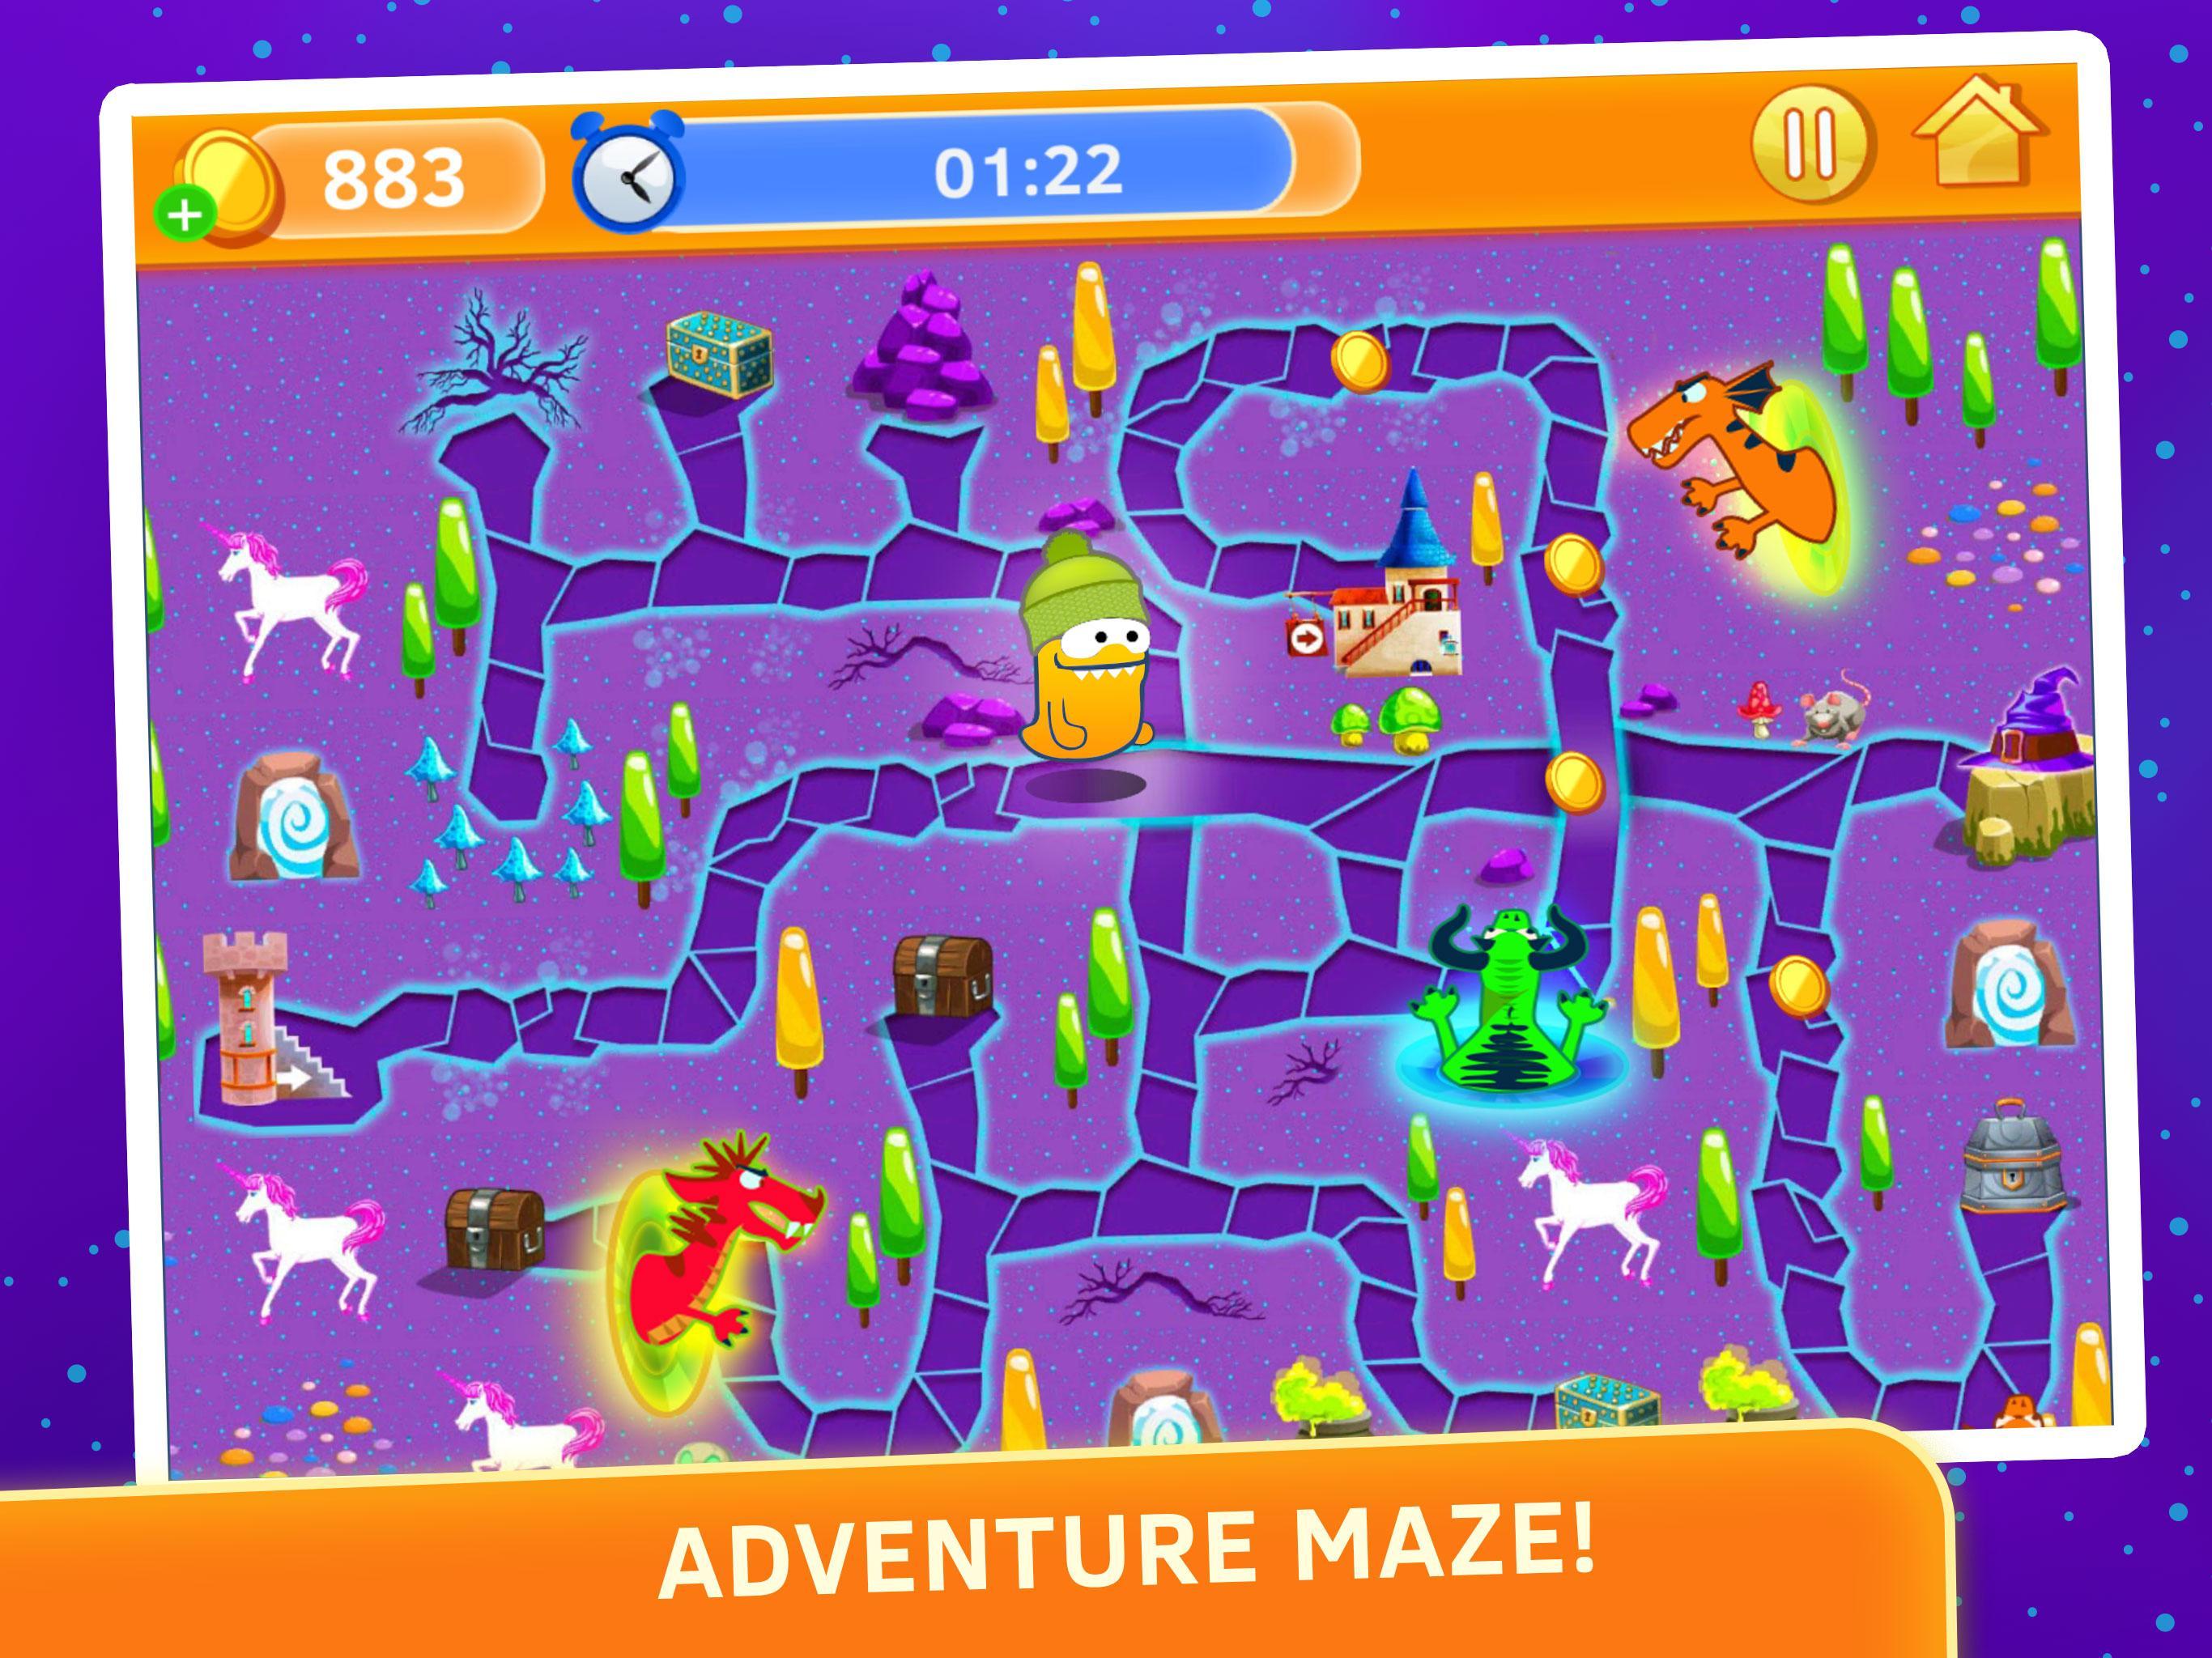 Maze Game For Kids Free Labyrinth With Dragons For Android Apk Download - labyrinth roblox game